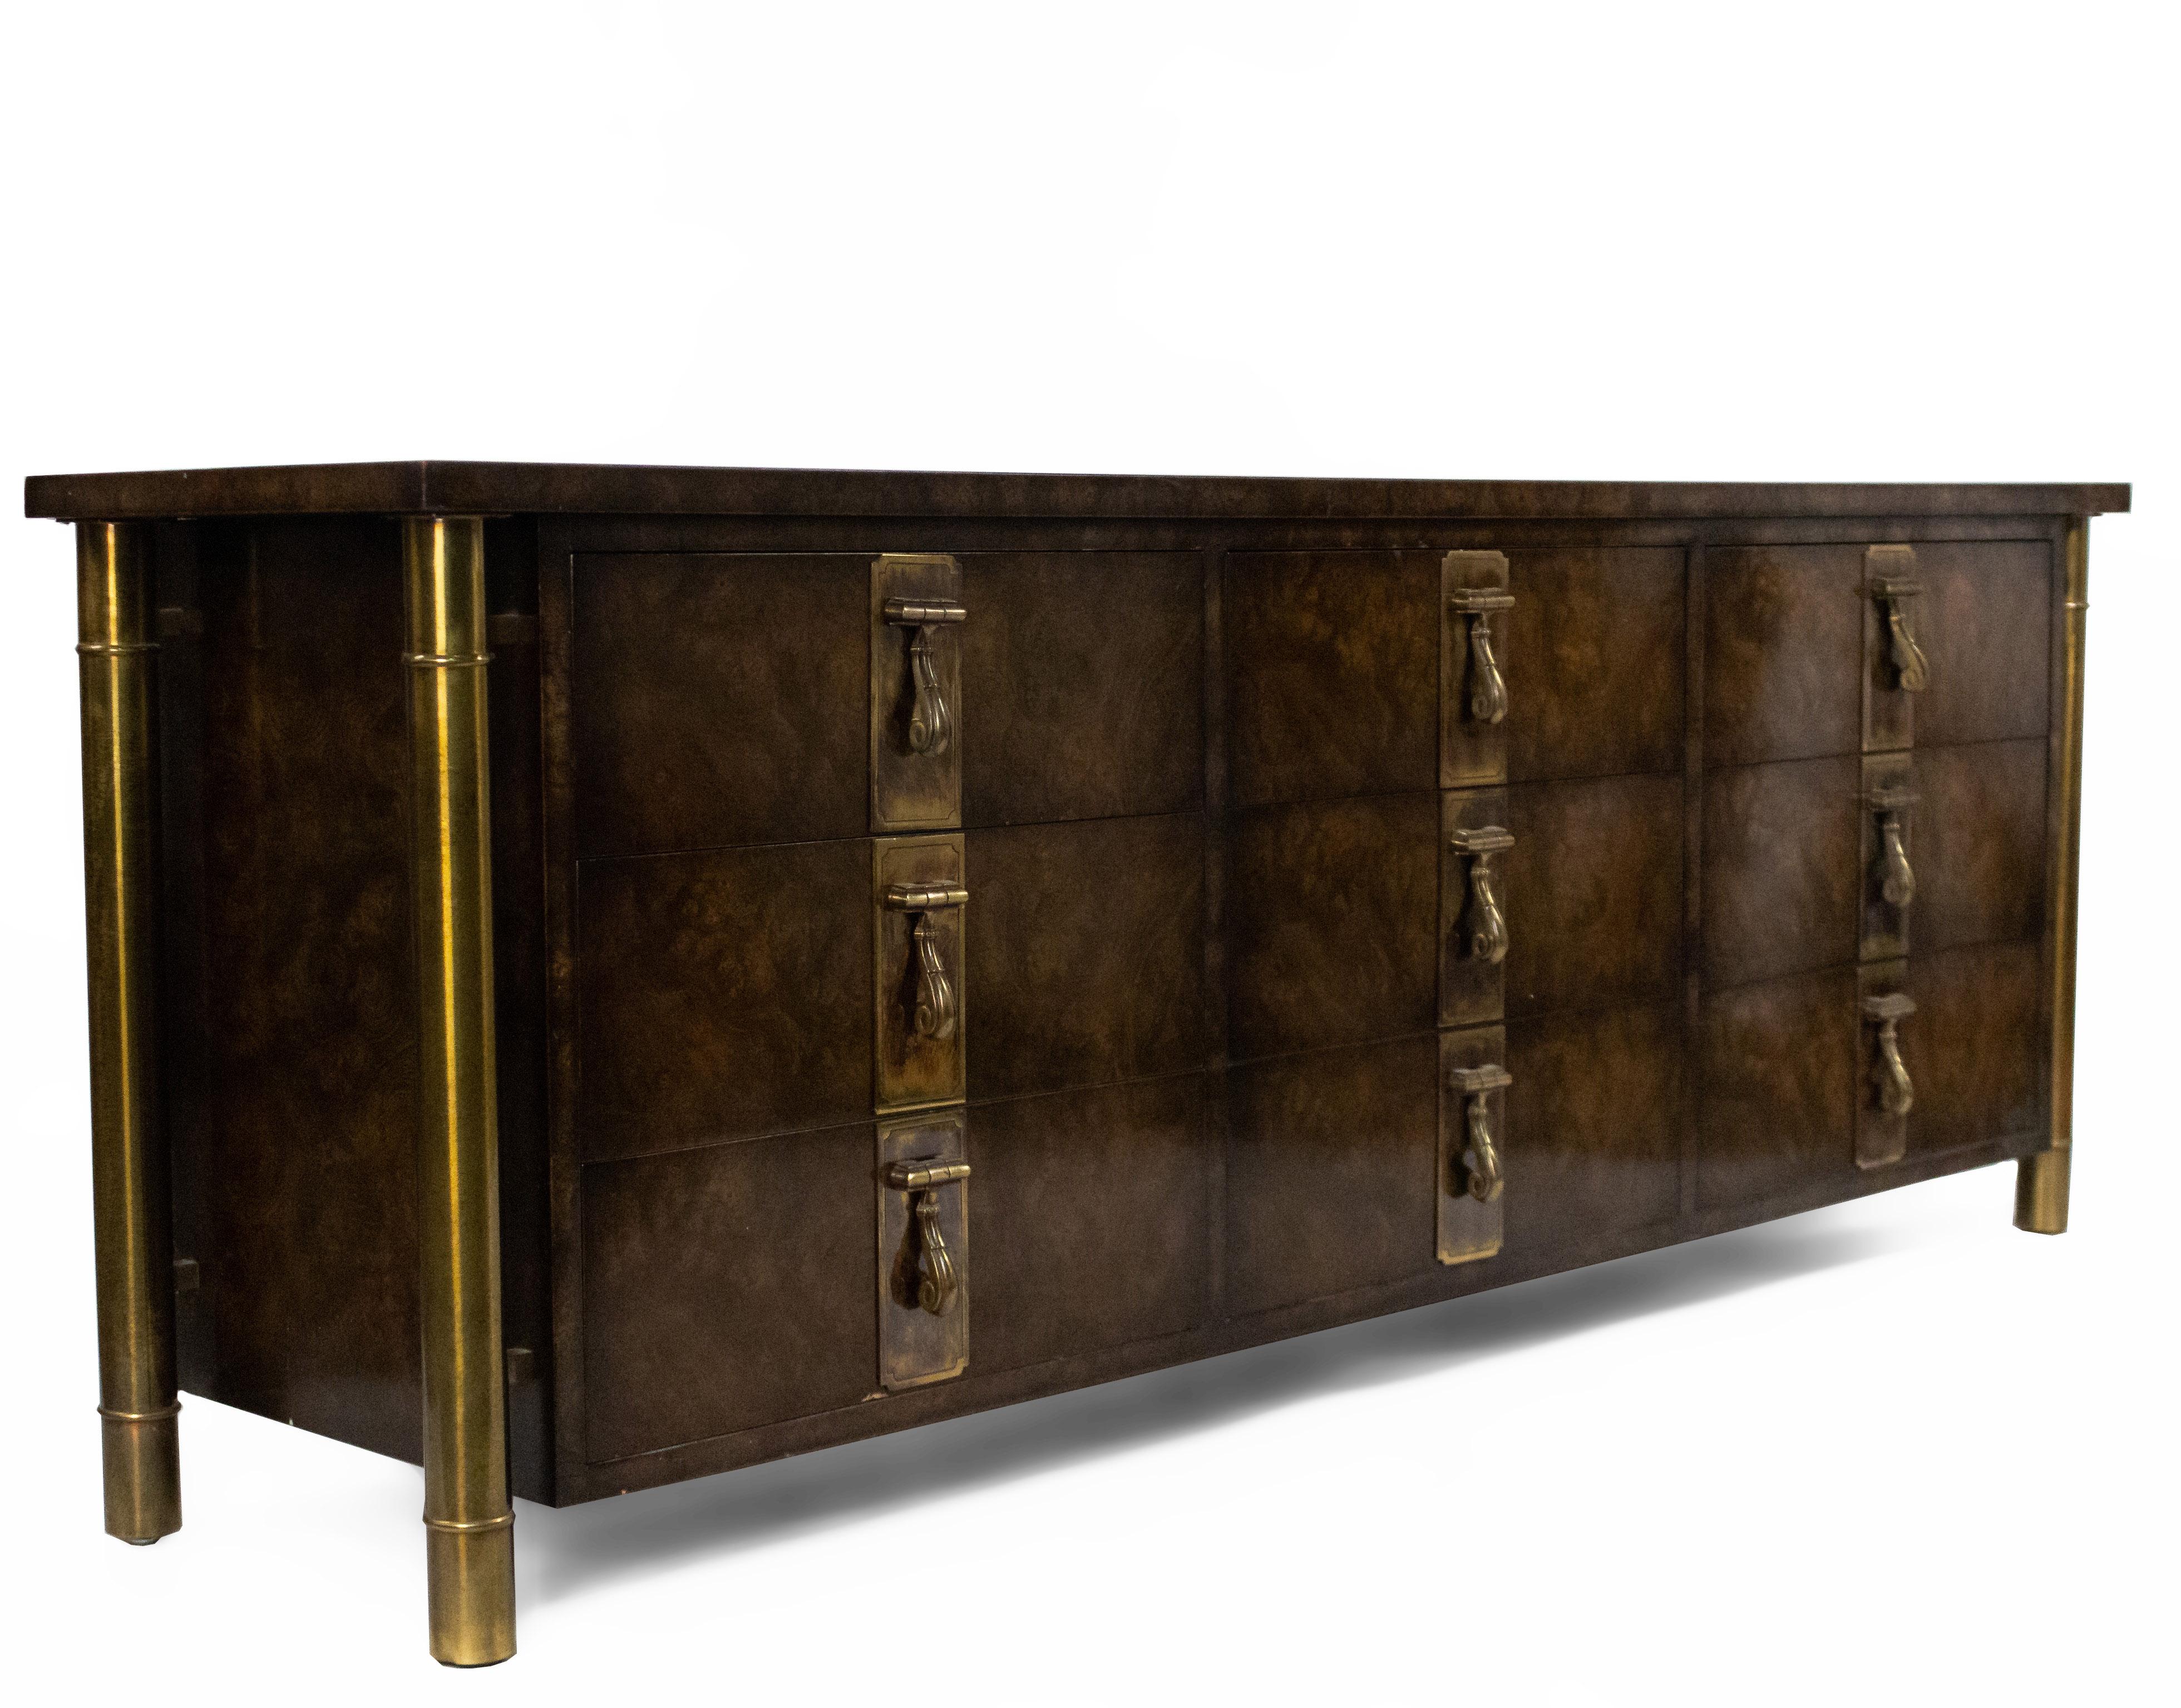 Mid-Century William Doezema for Mastercraft credenza in dark elm burl with 9 drawers, patinated brass drop pulls and cylindrical brass legs in the style of Bernhard Rohne.